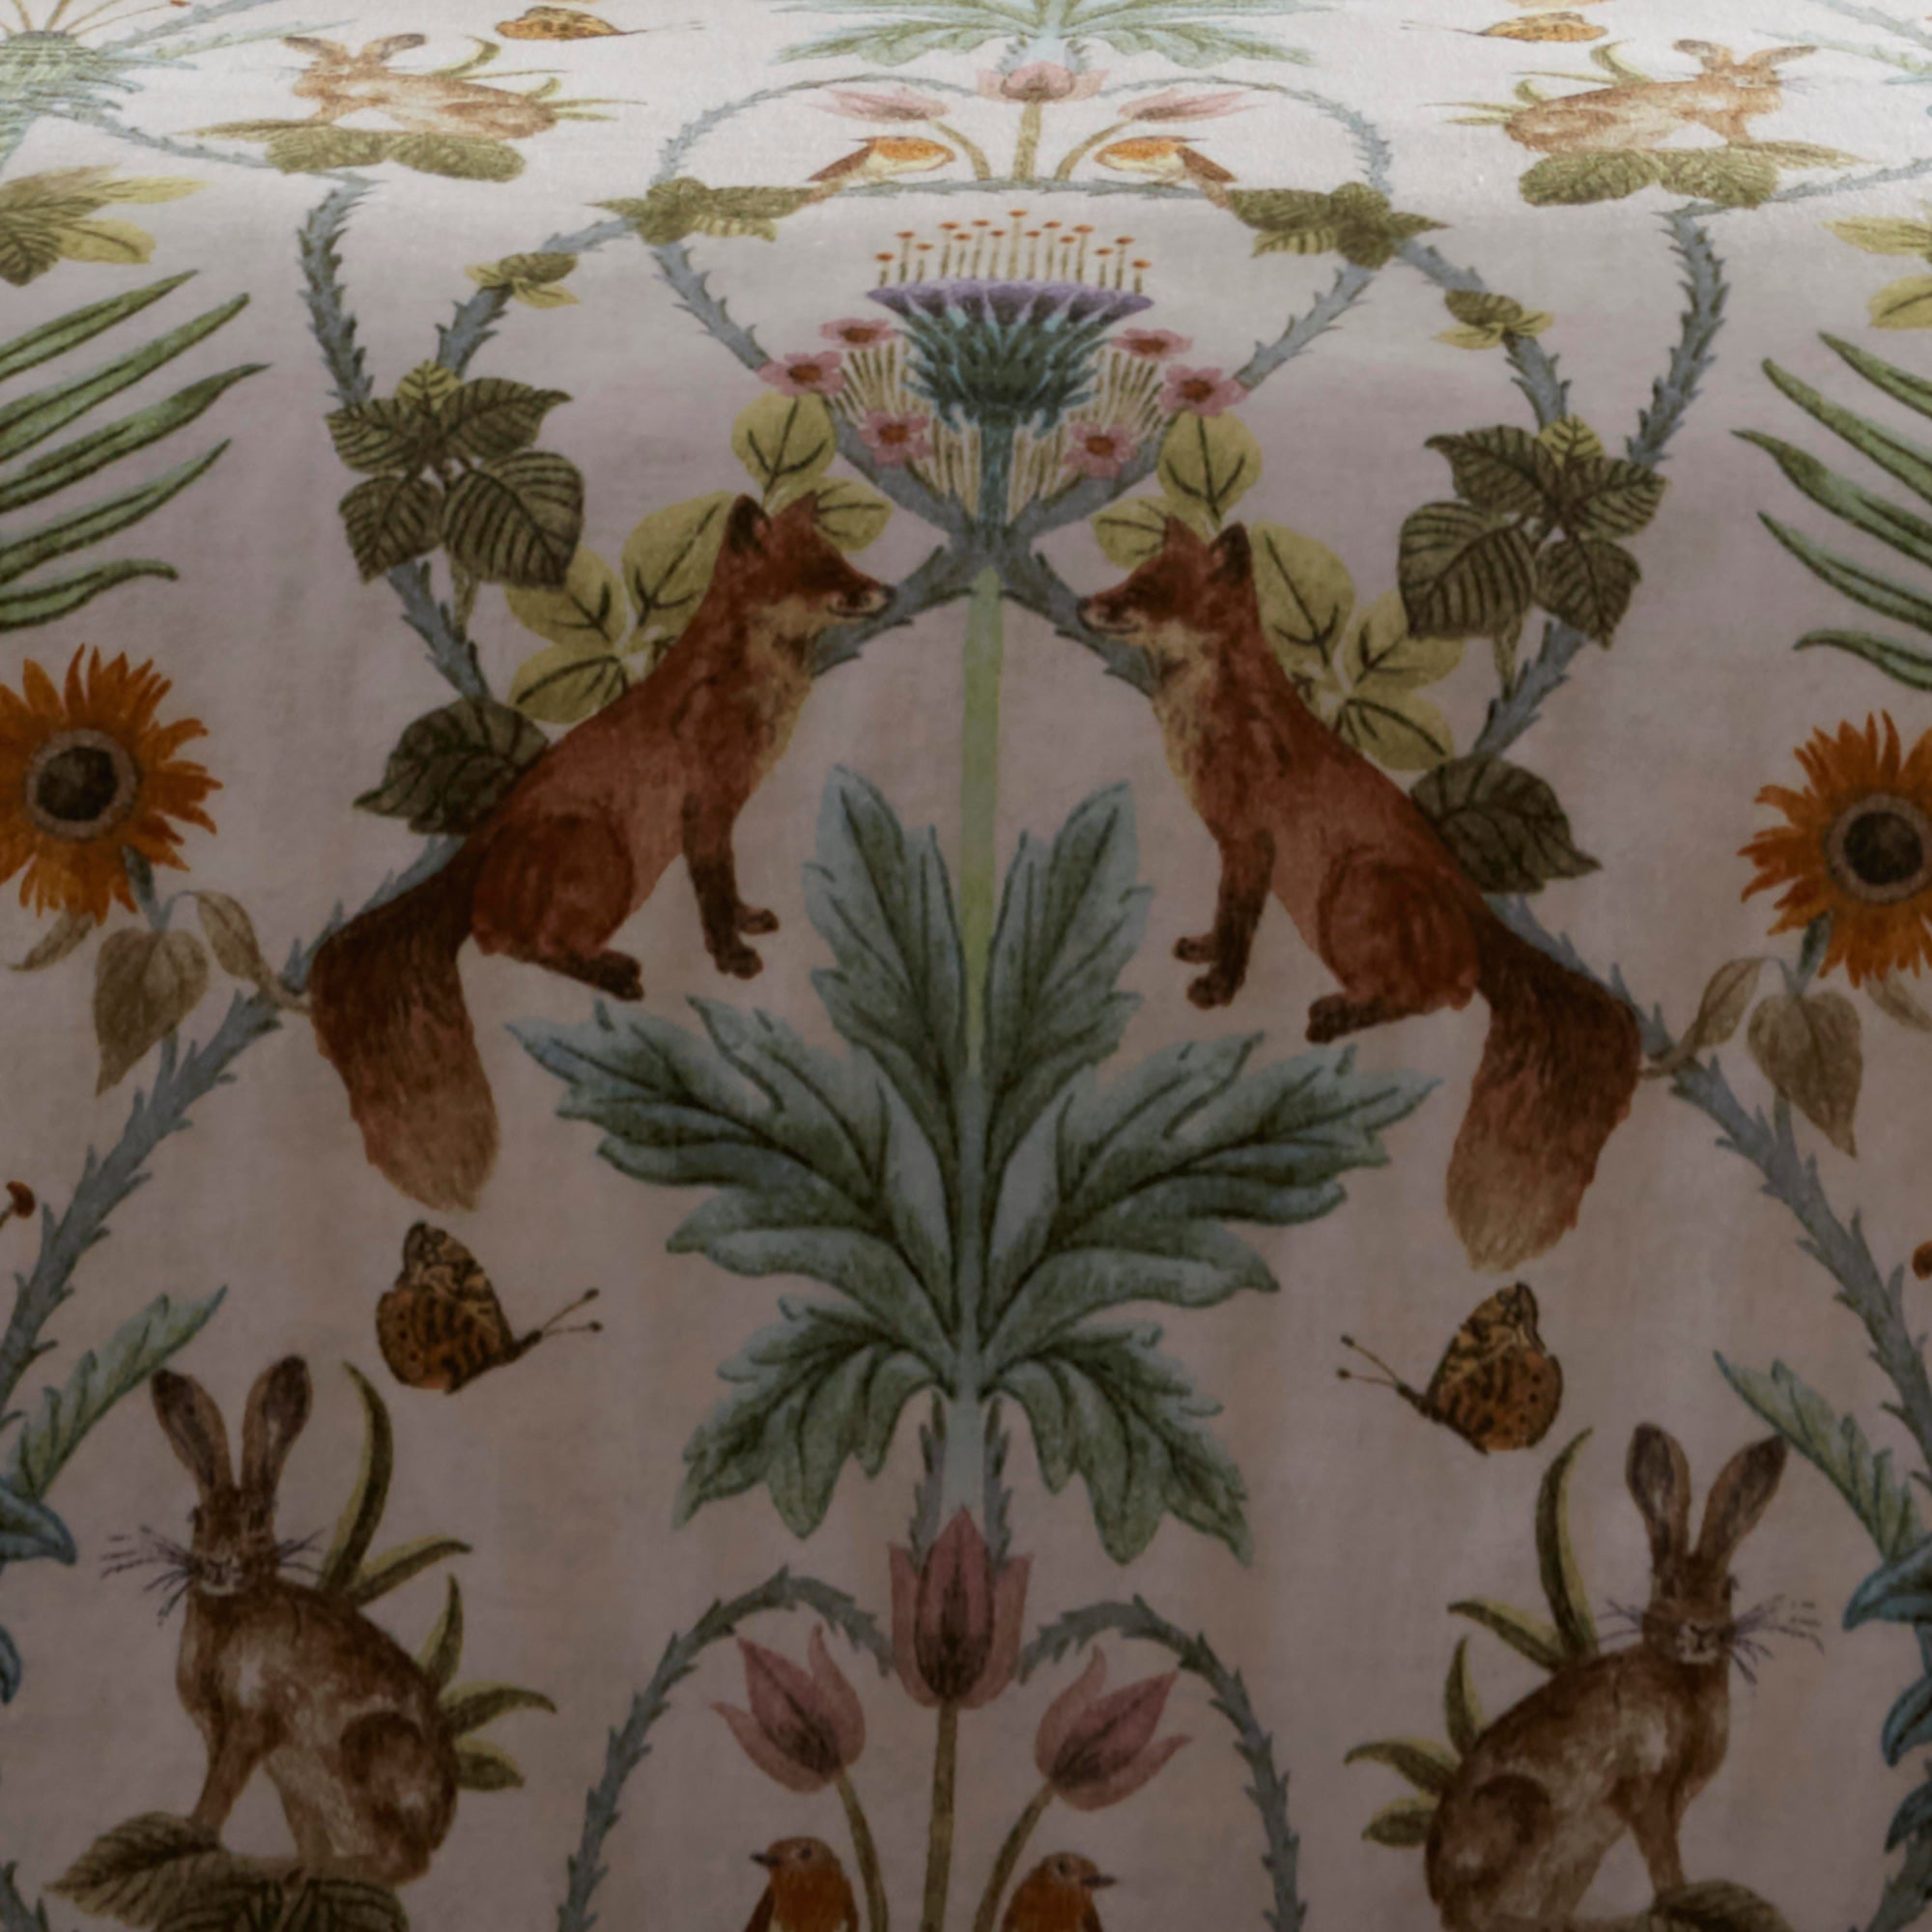 Foxdale Duvet Cover Set by Appletree Heritage in Natural - Duvet Cover Set - Appletree Heritage